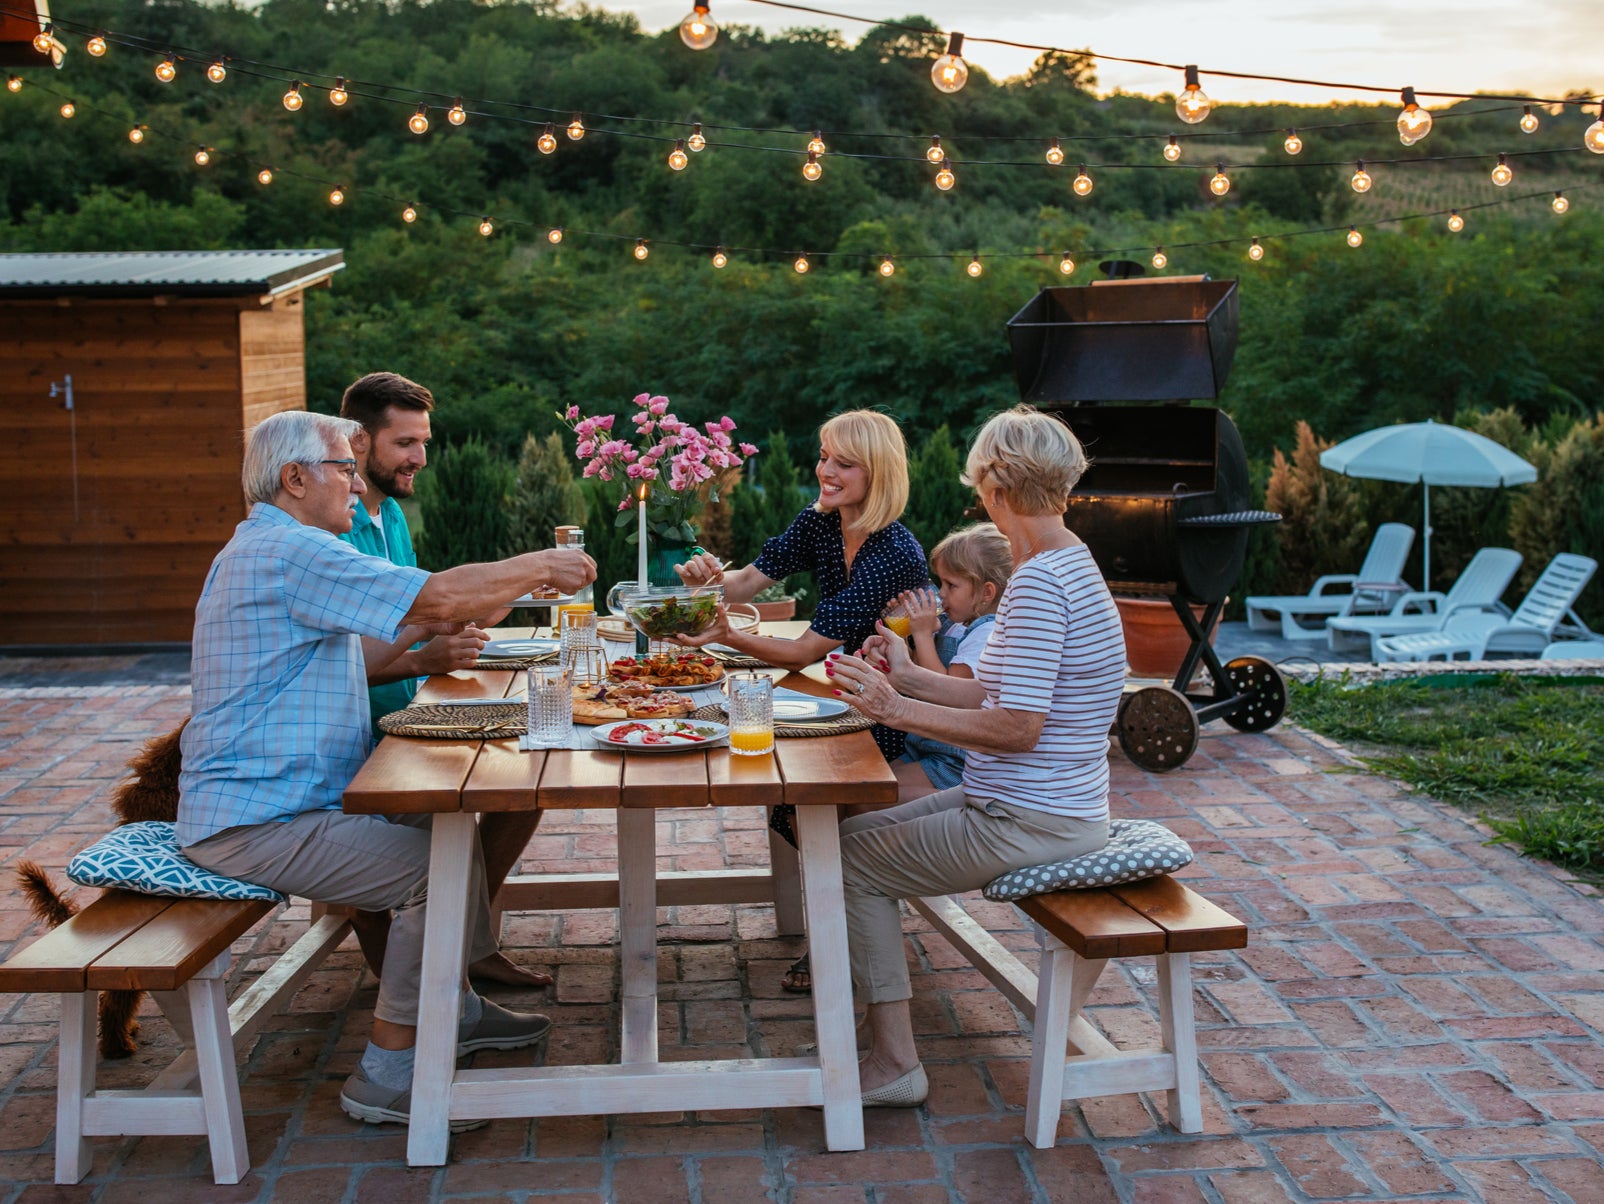 Nine of out ten people said their family is more relaxed when they eat together